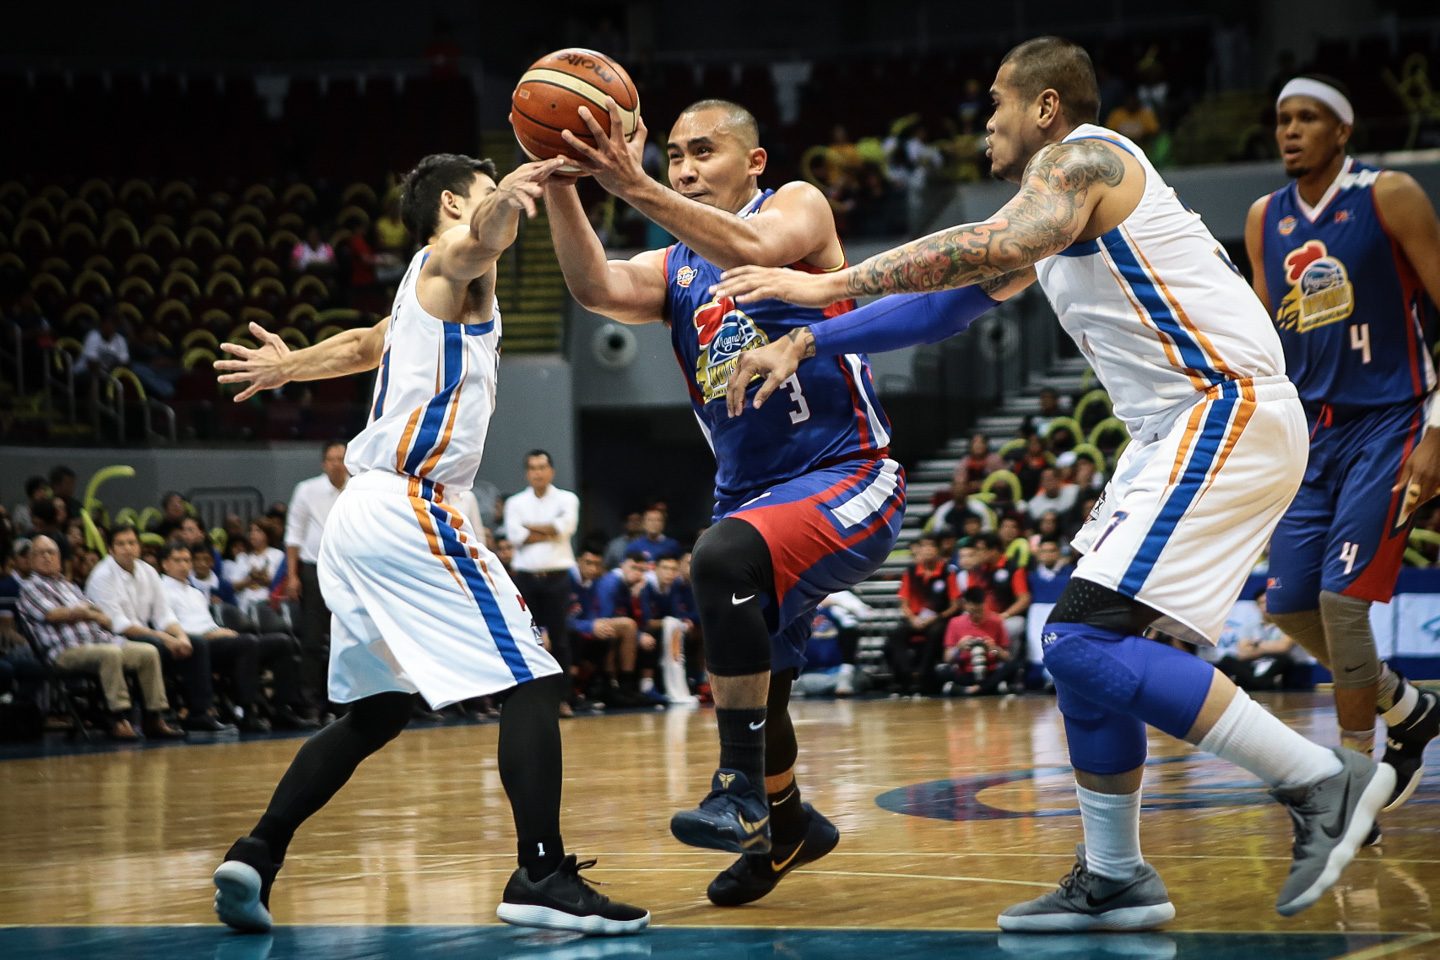 Lee used ex-coach Guiao as motivation in Game 2 outburst for Magnolia